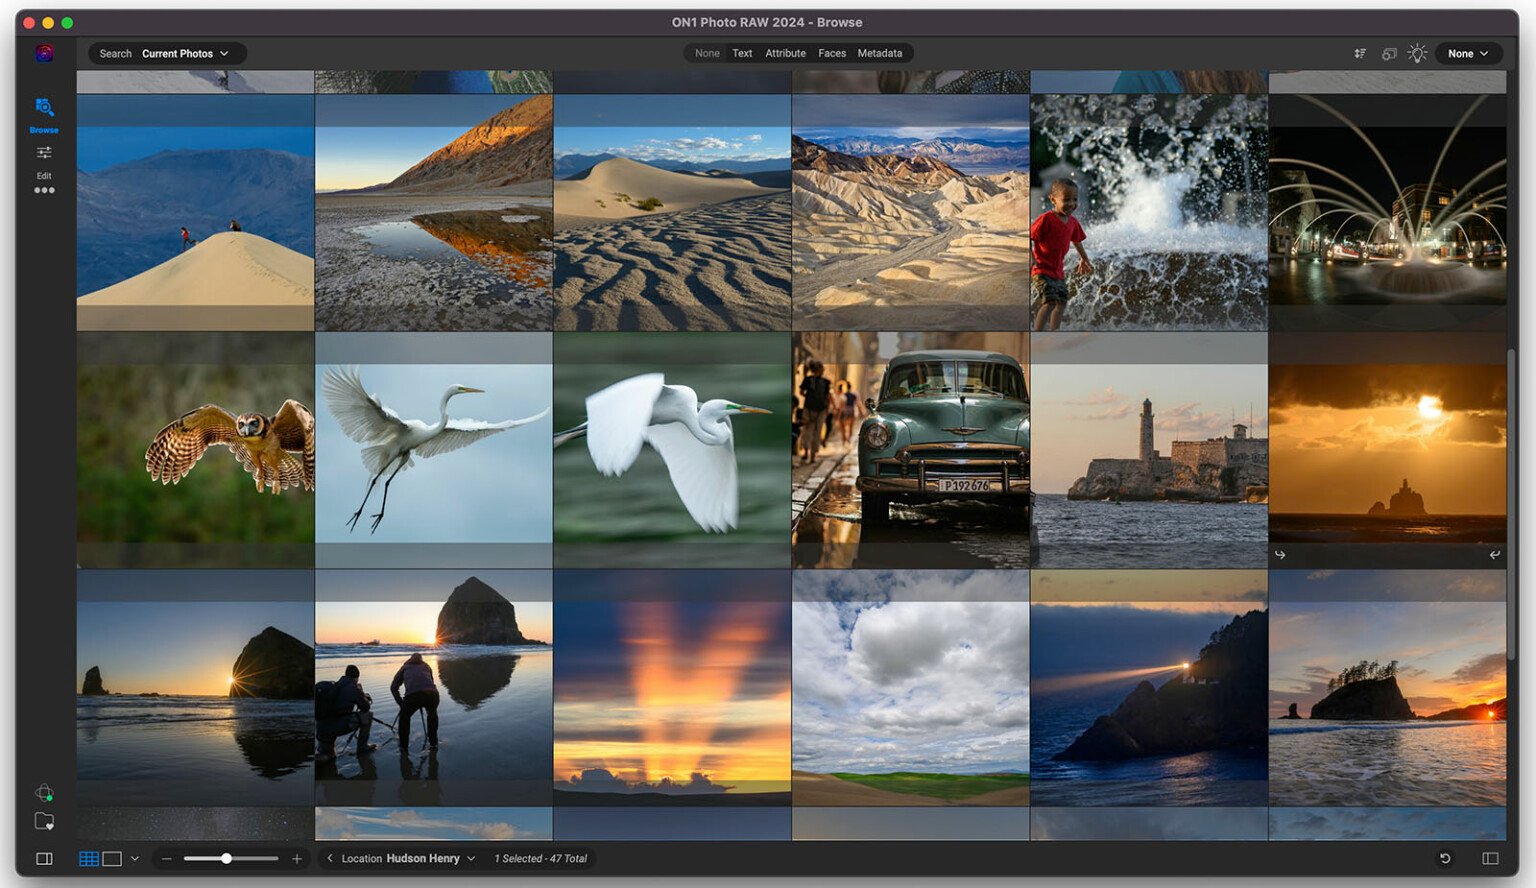 ON1 Photo RAW 2024.1 v18.1.0.14835 (x64)  Multilingual On1-photo-raw-2024-browse-1536x888